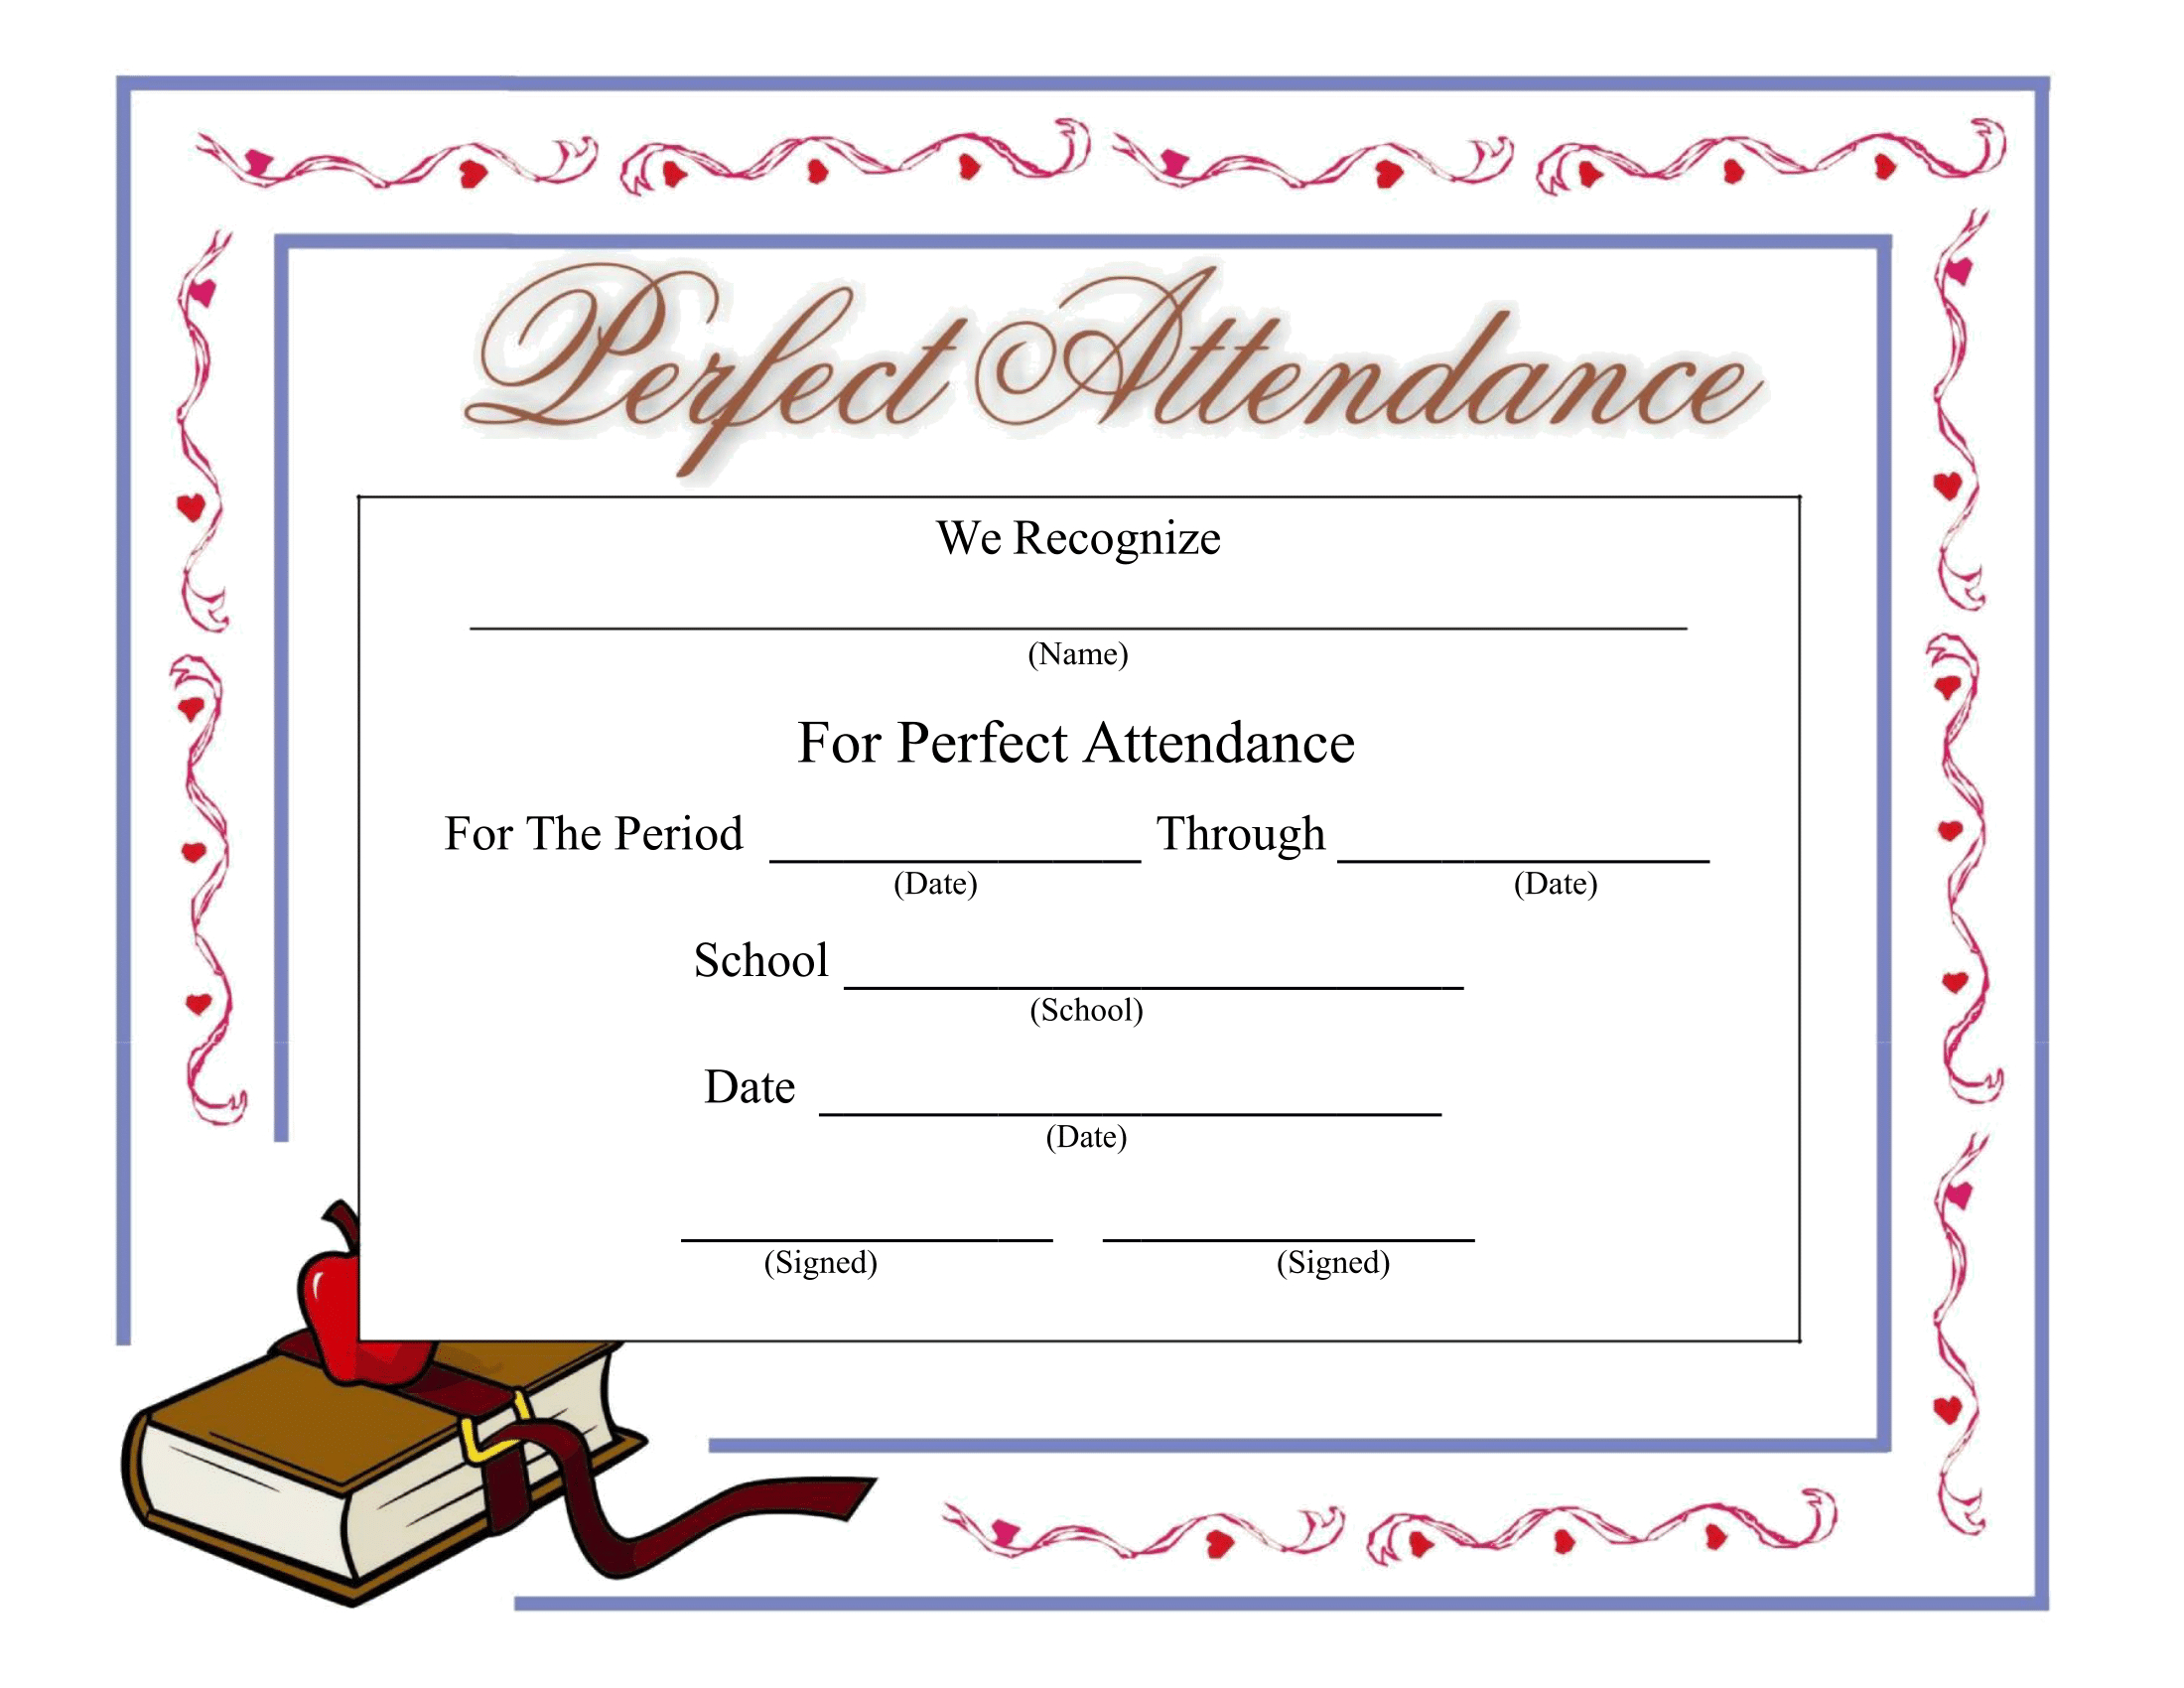 Stupendous Perfect Attendance Certificate Printable | Dora's In Vbs Certificate Template